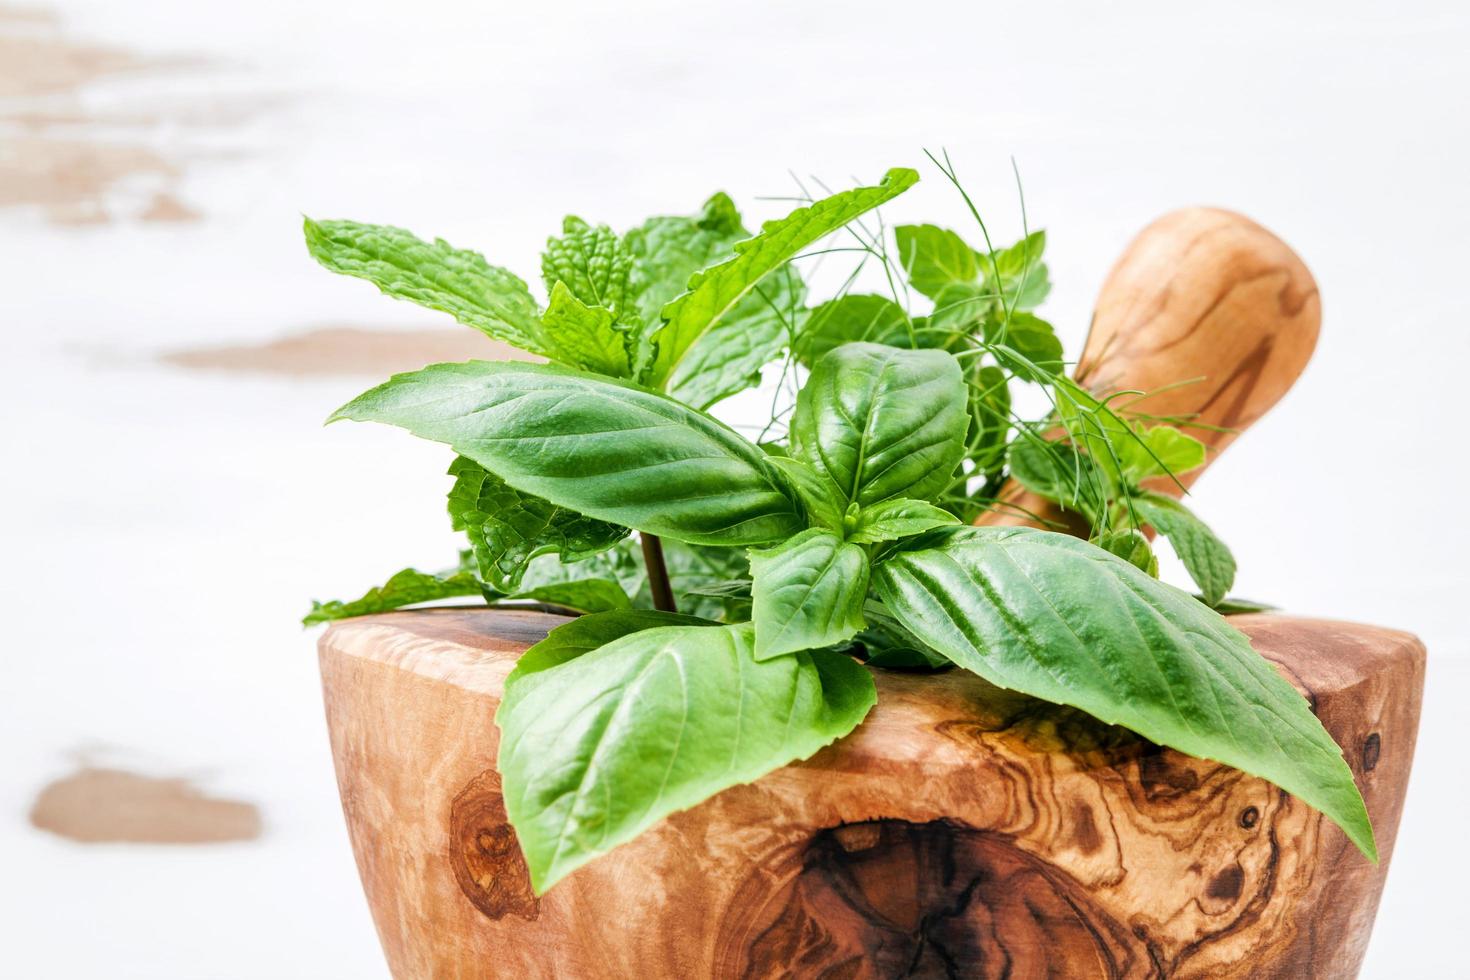 Green herbs in a wooden mortar photo